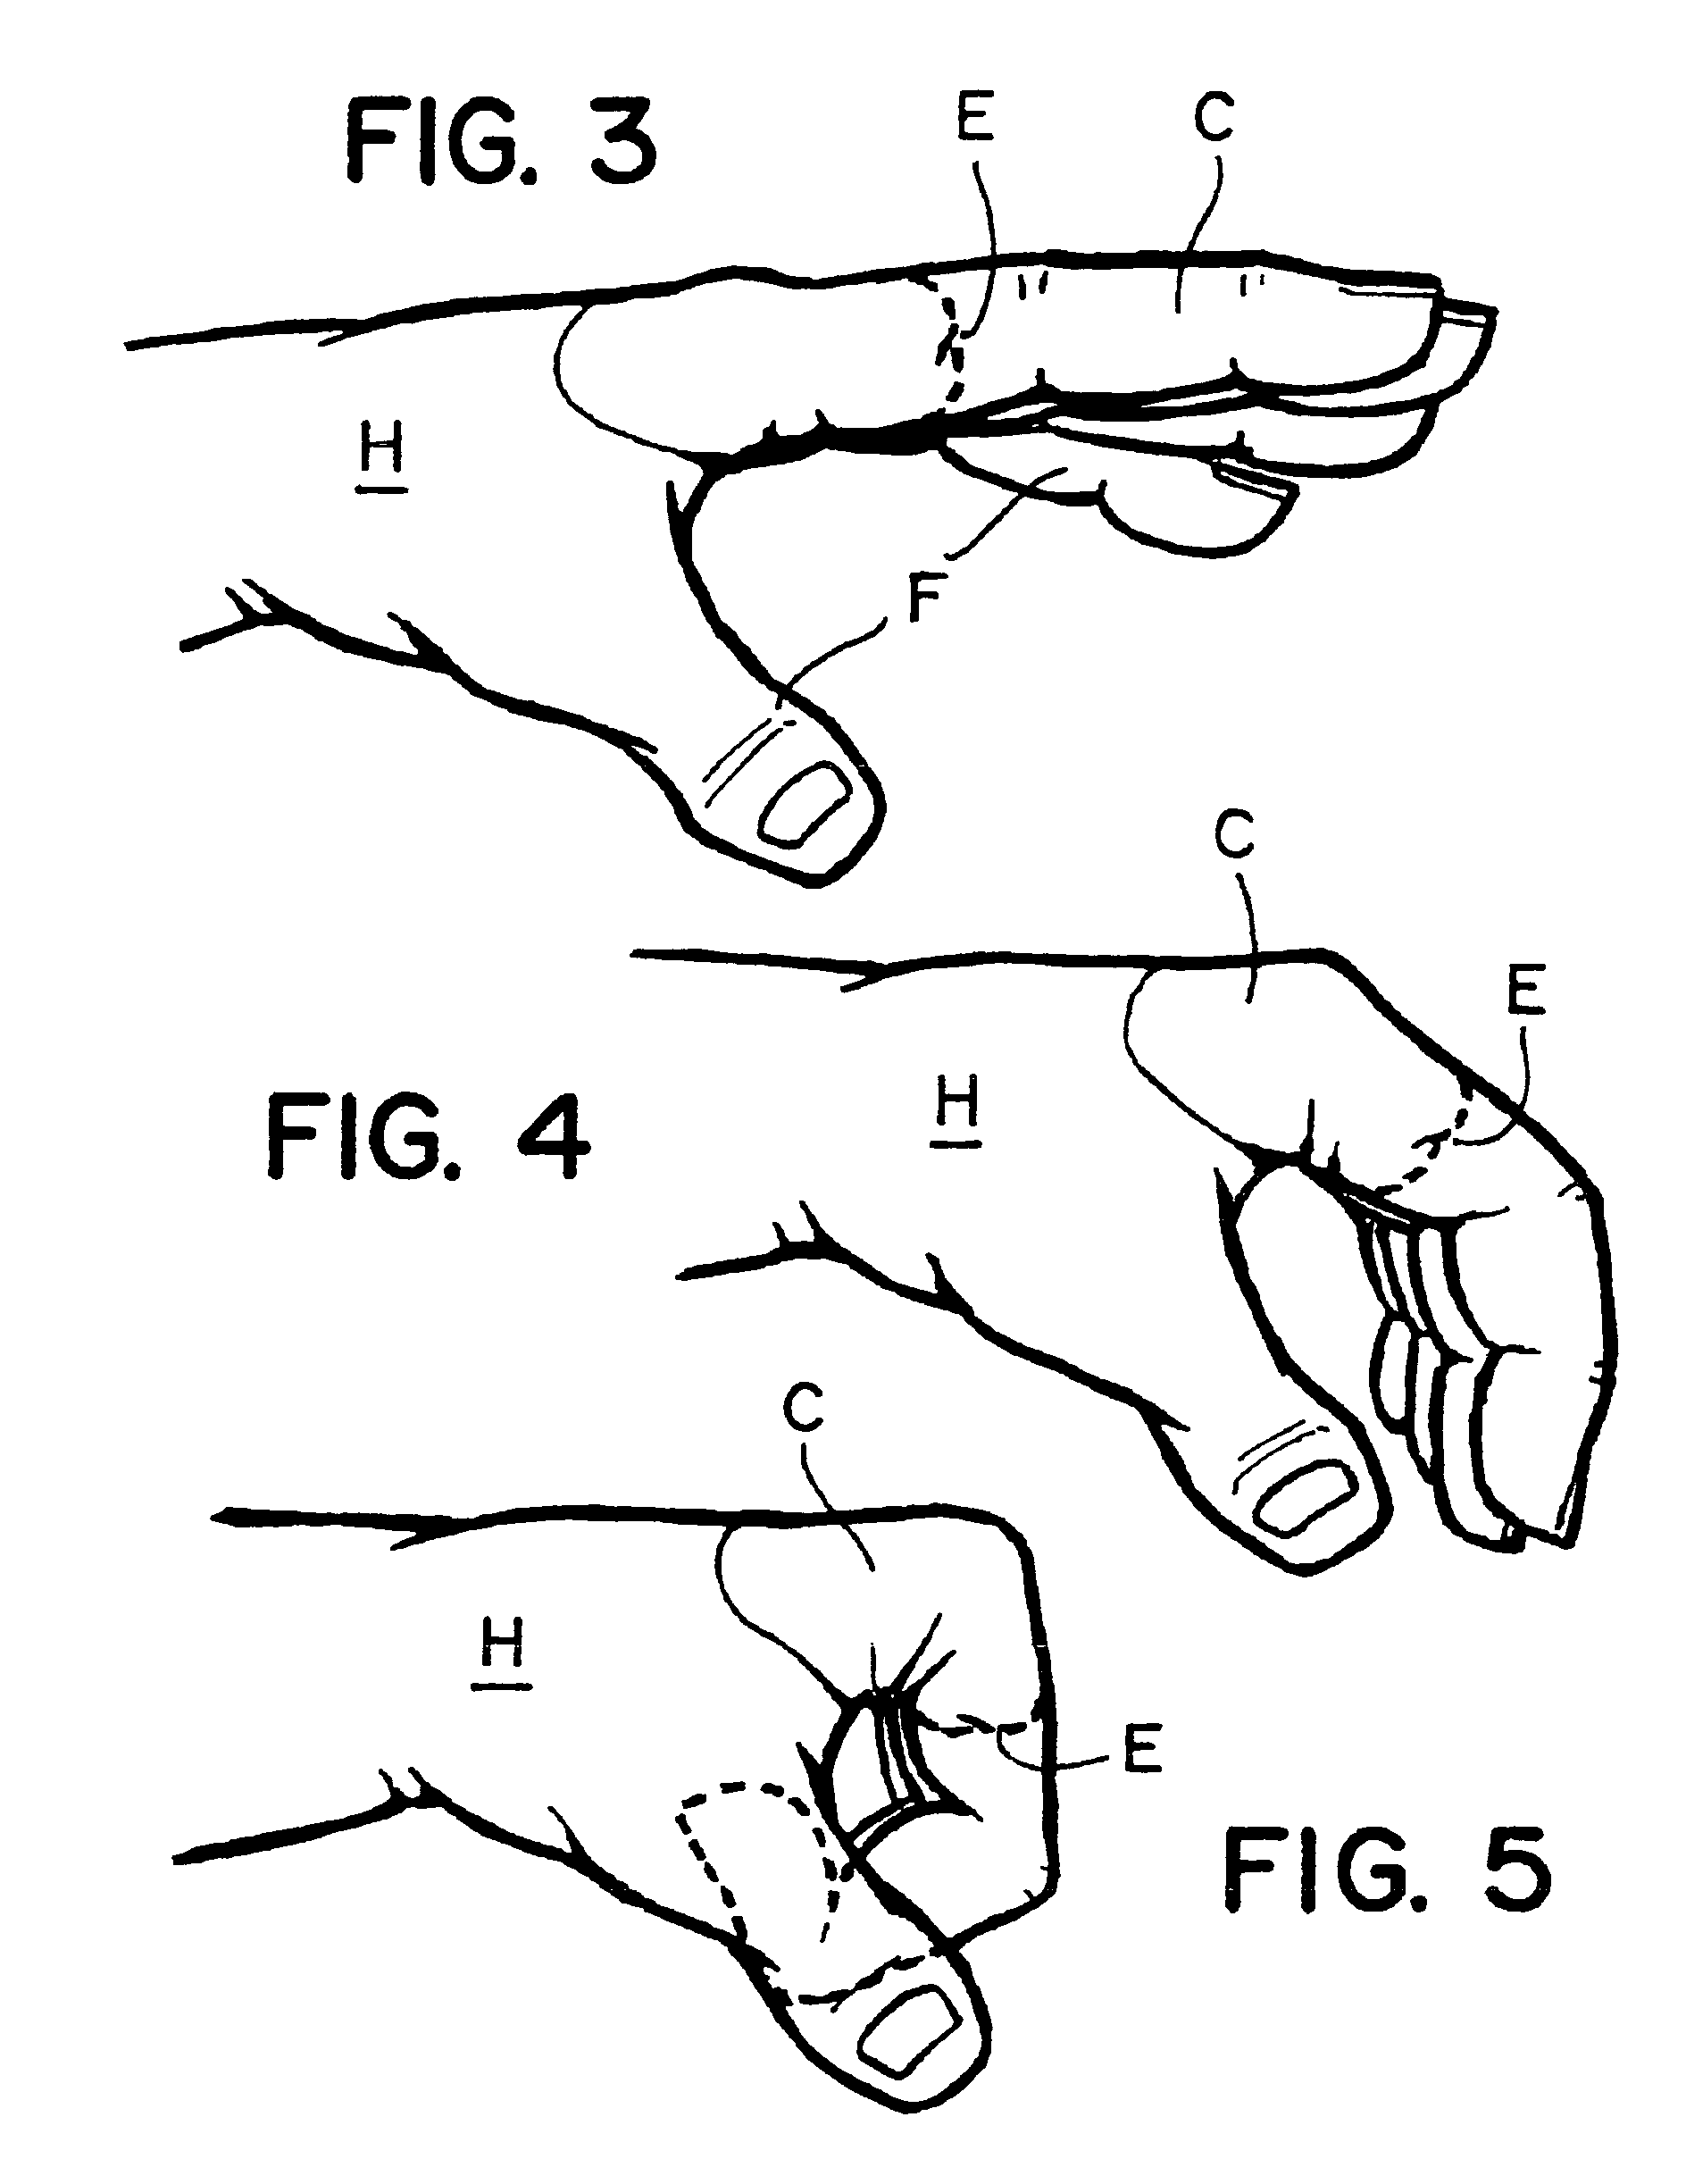 Articulated artificial finger assembly